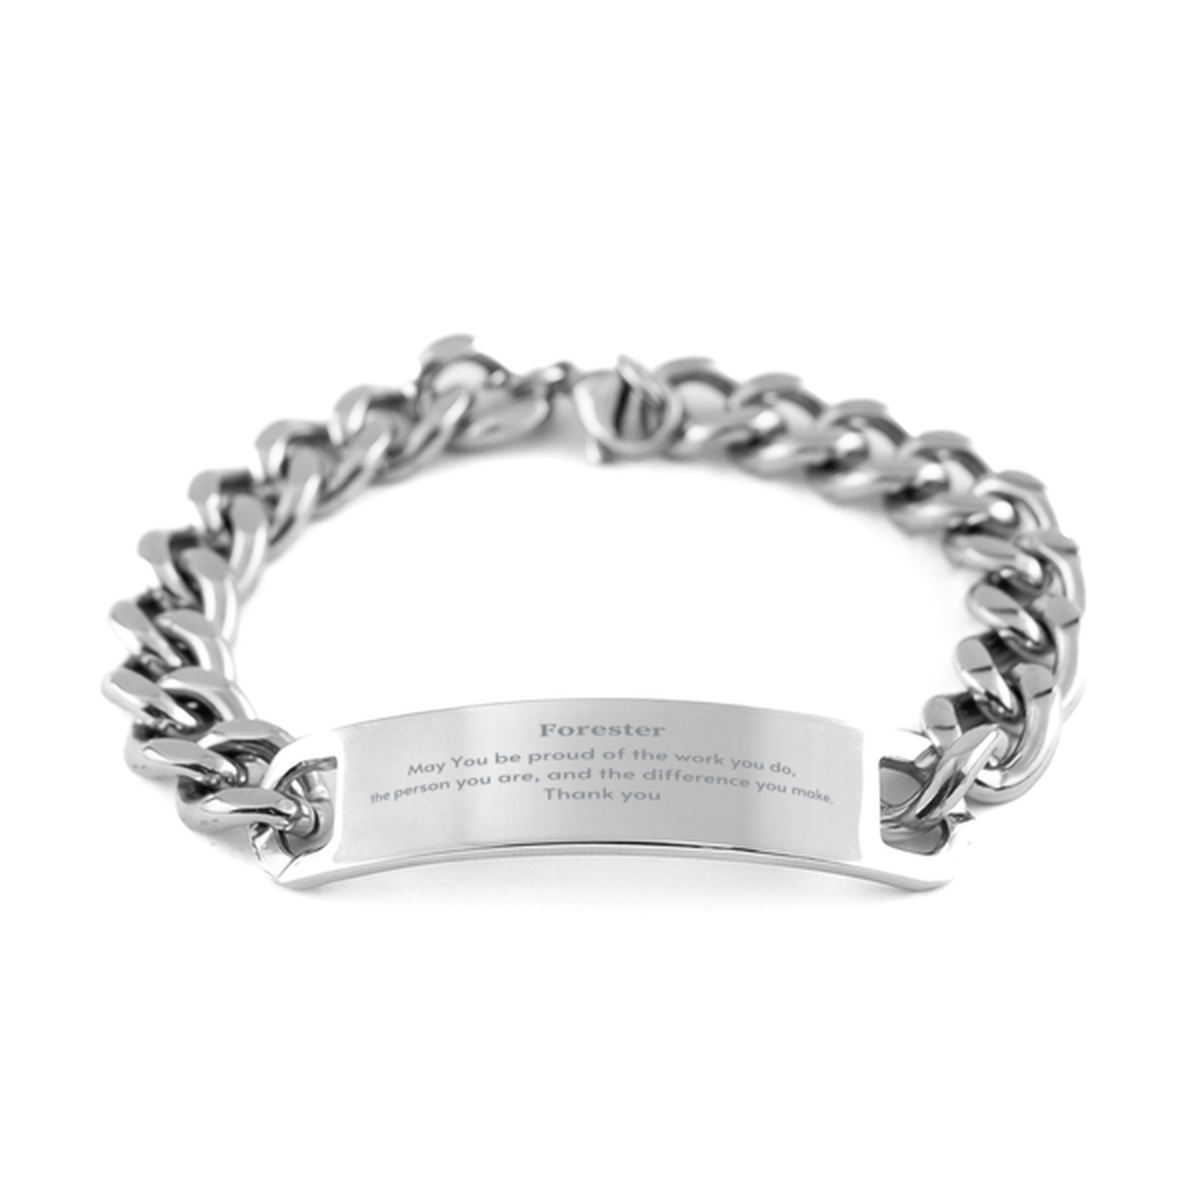 Heartwarming Cuban Chain Stainless Steel Bracelet Retirement Coworkers Gifts for Forester, Forester May You be proud of the work you do, the person you are Gifts for Boss Men Women Friends